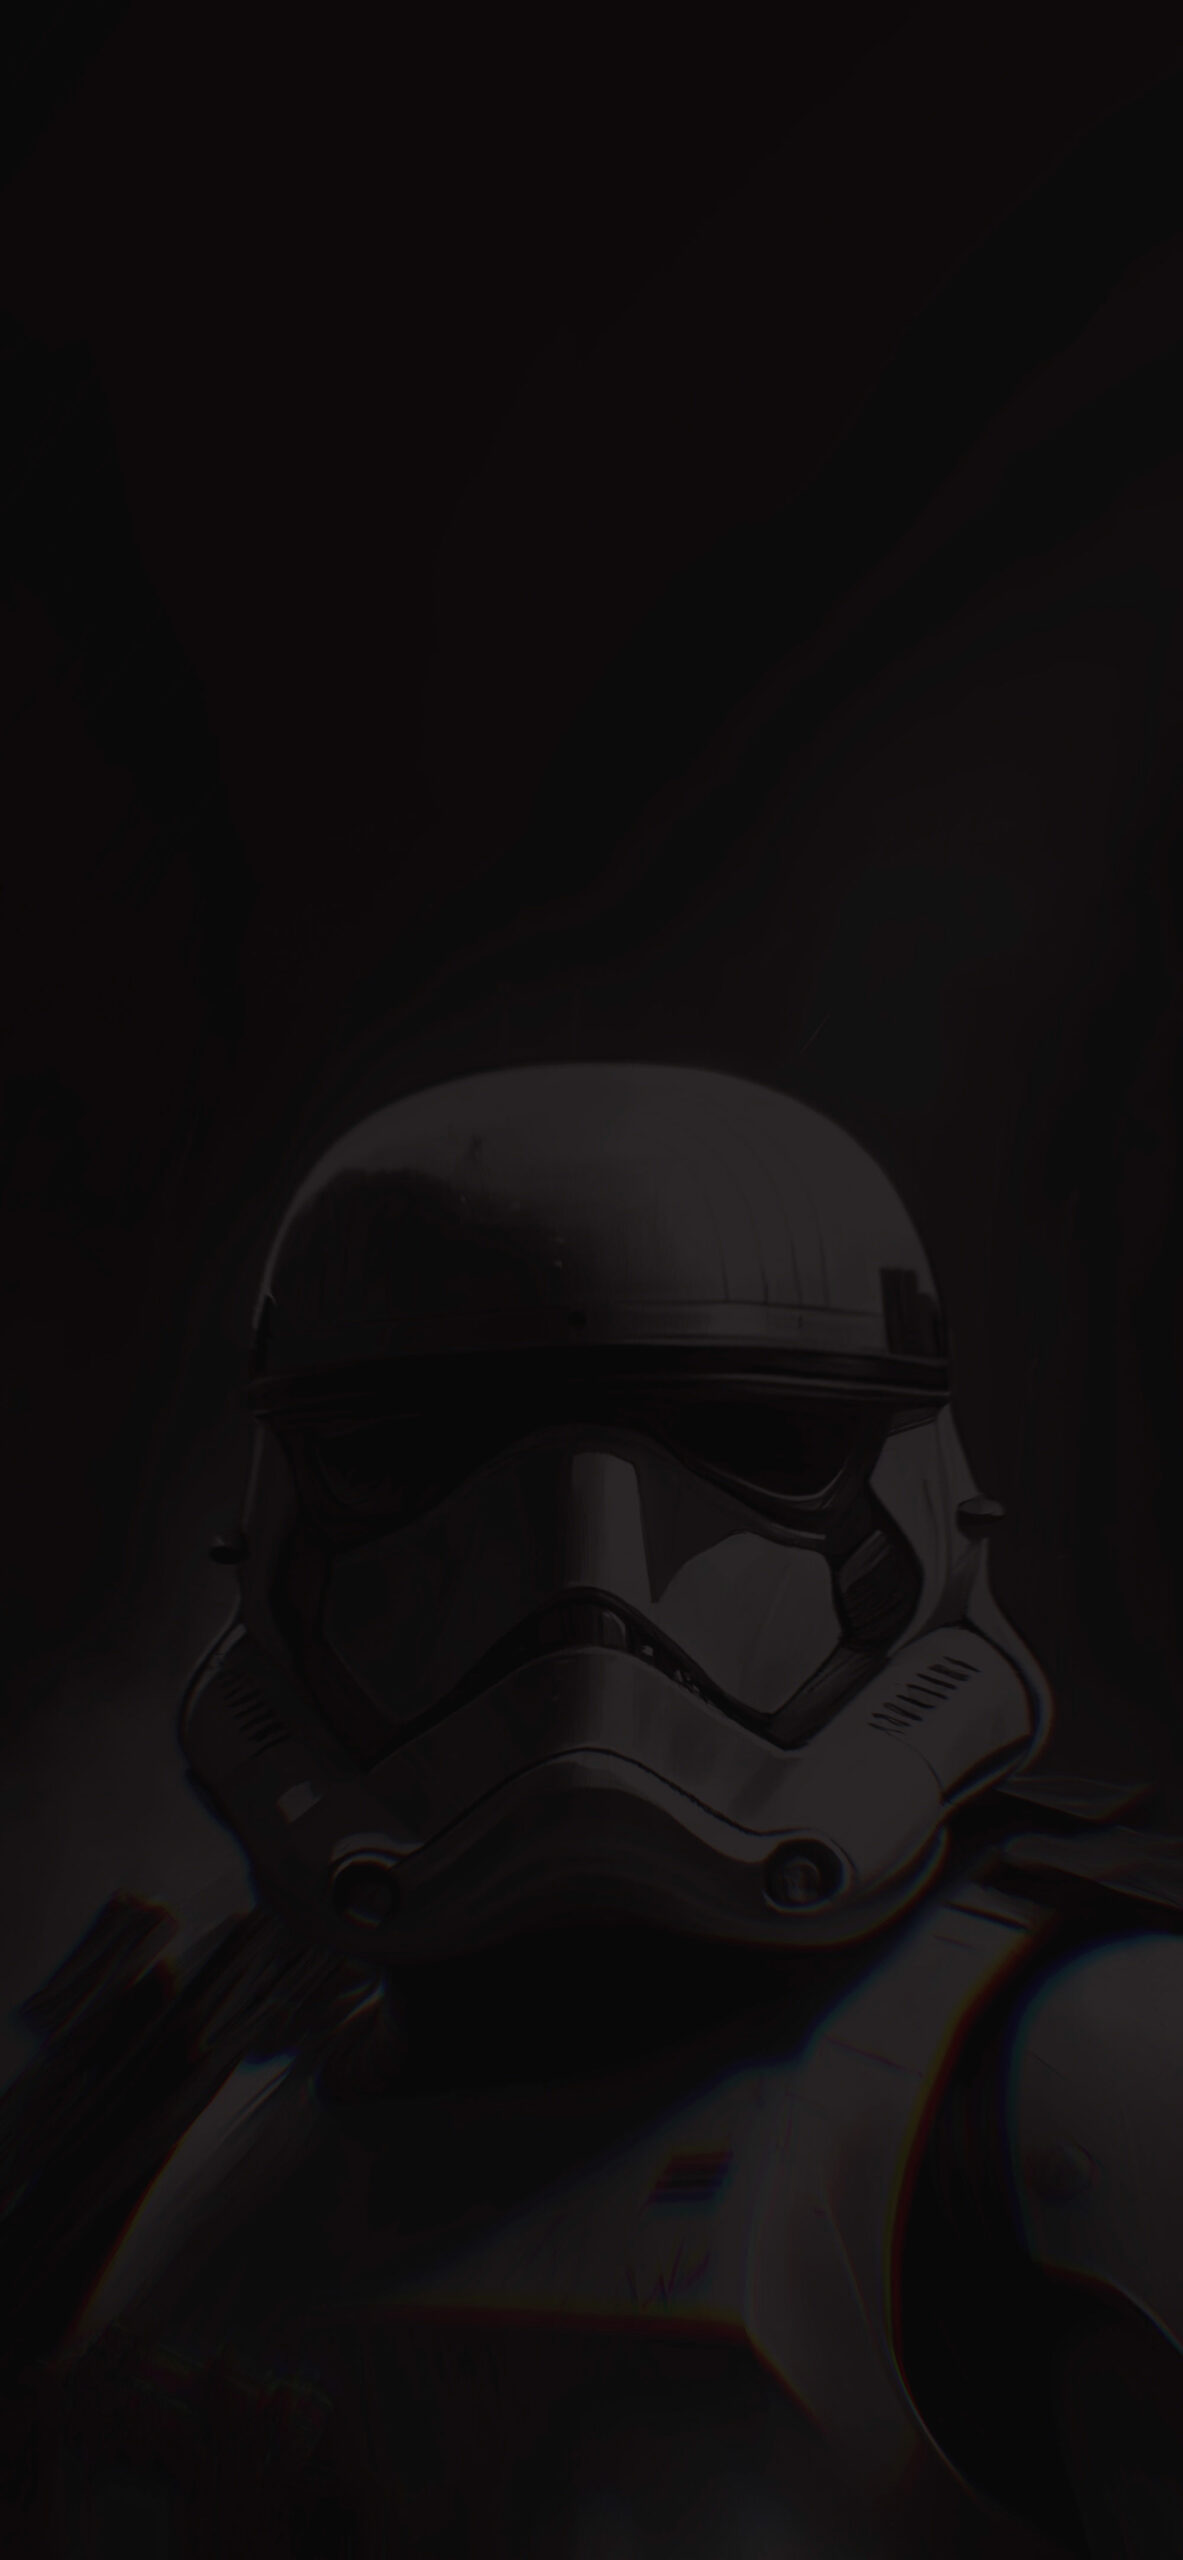 star wars stormtrooper black and white background